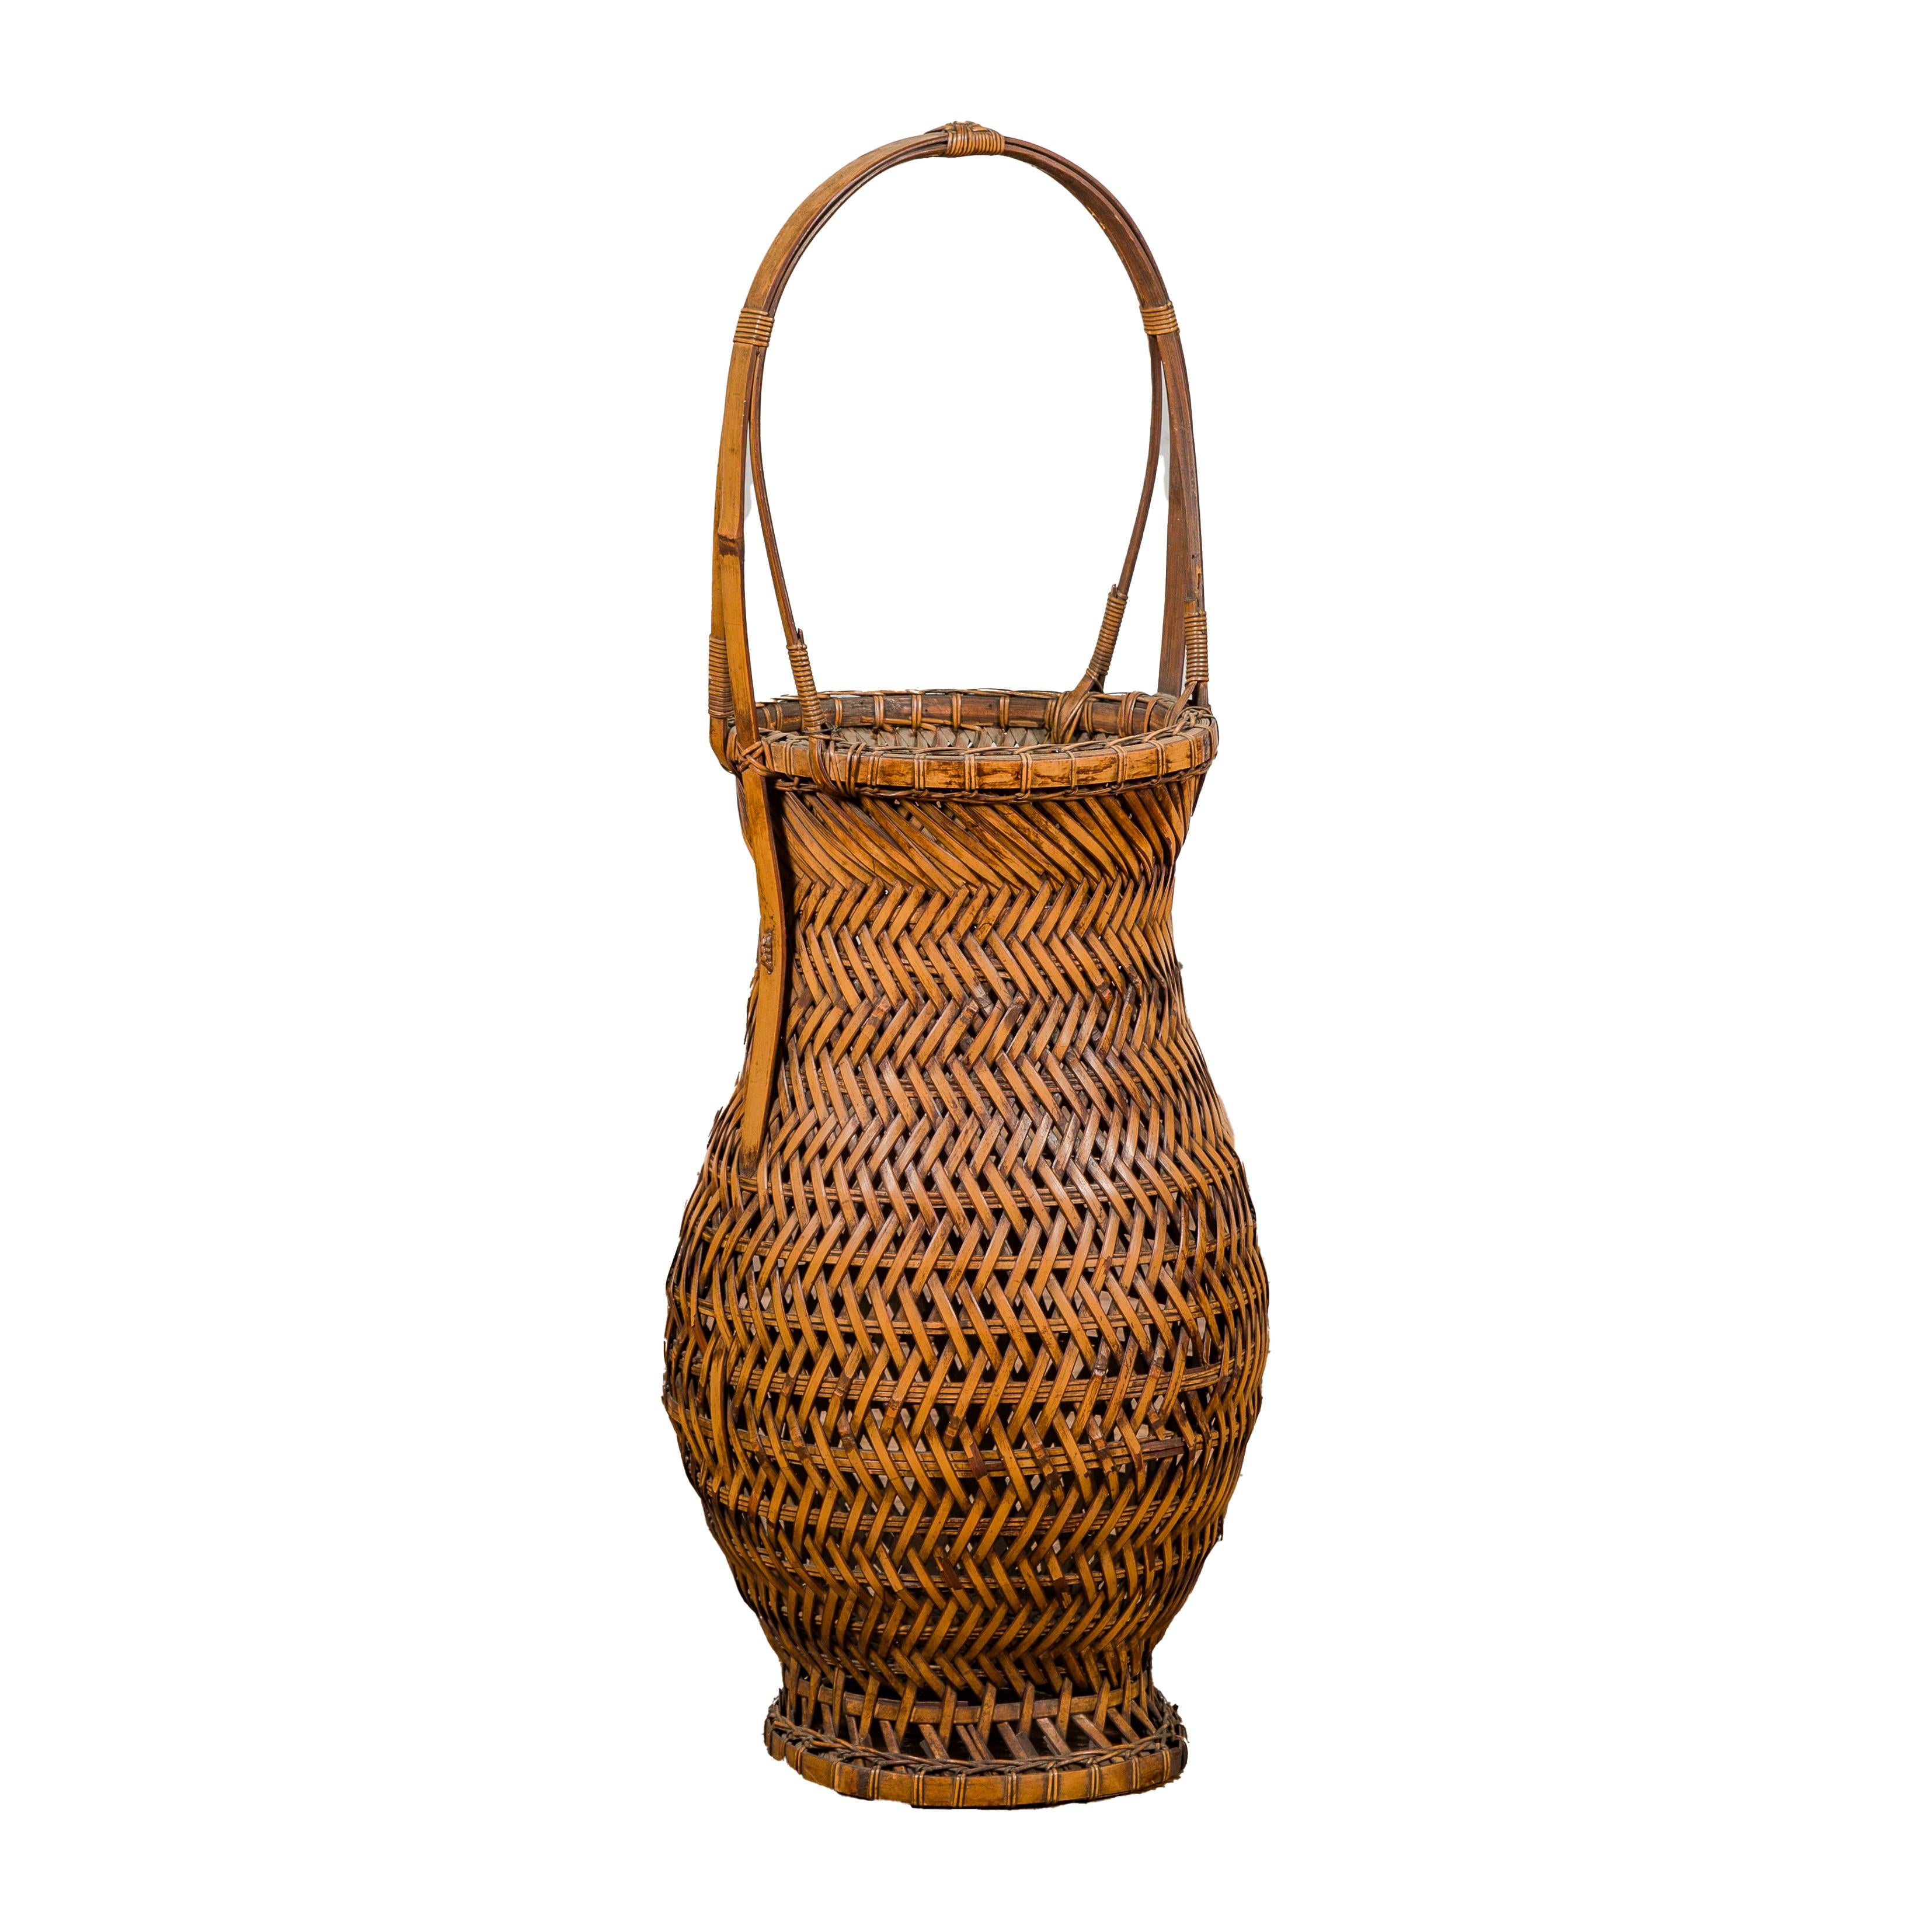 An antique Japanese woven bamboo Ikebana basket from circa 1900 with generous rounded silhouette and large handle at the top. This antique Japanese woven bamboo Ikebana basket, hailing from circa 1900, is a splendid example of traditional Japanese